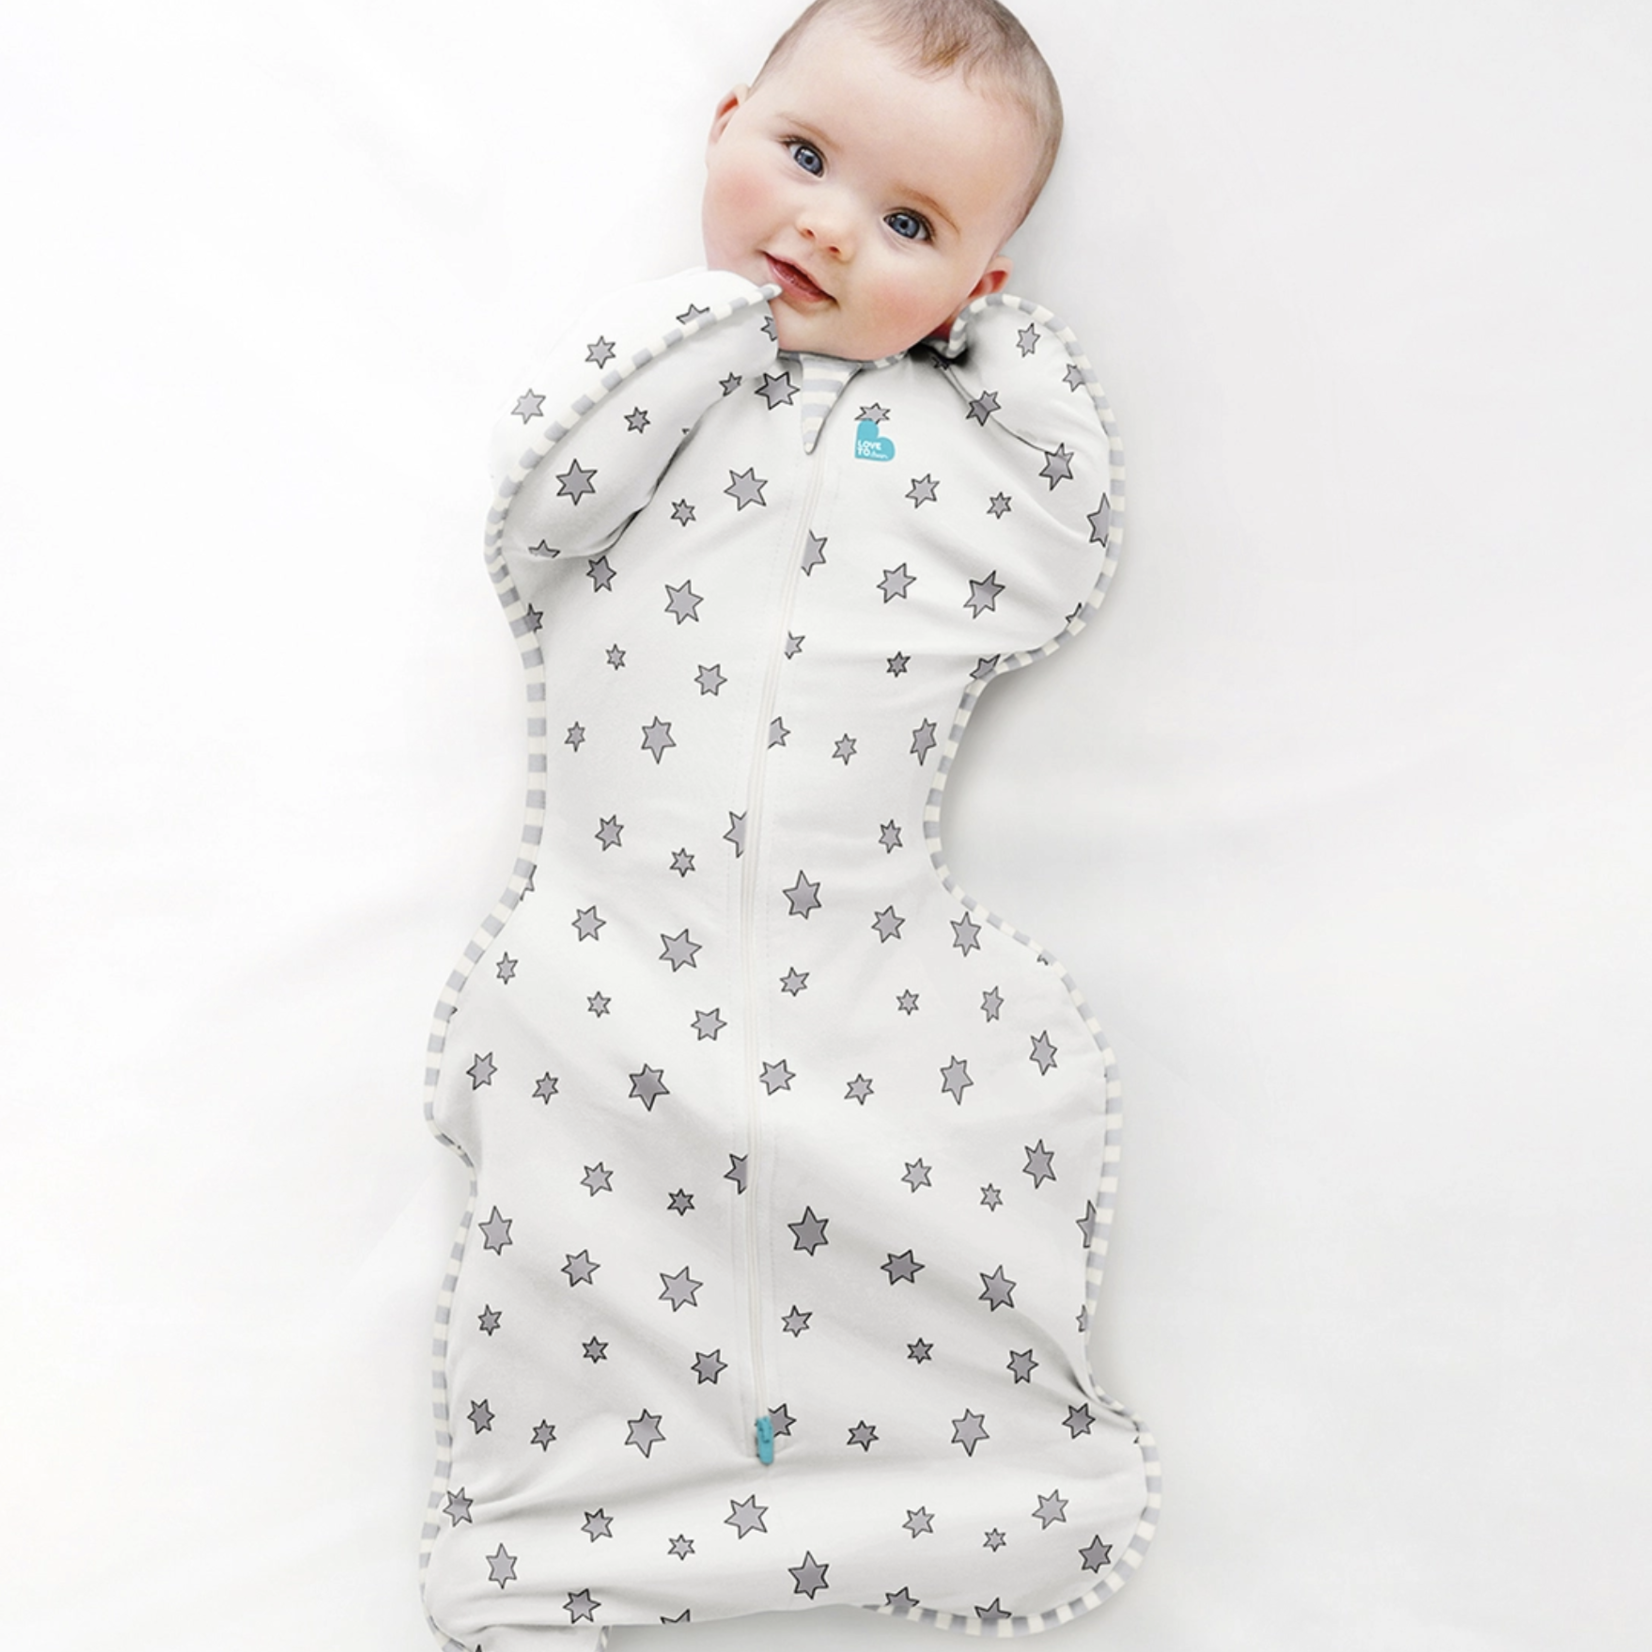 Love To Dream SWADDLE UP™ Bamboo 0.2T-Cream Superstar